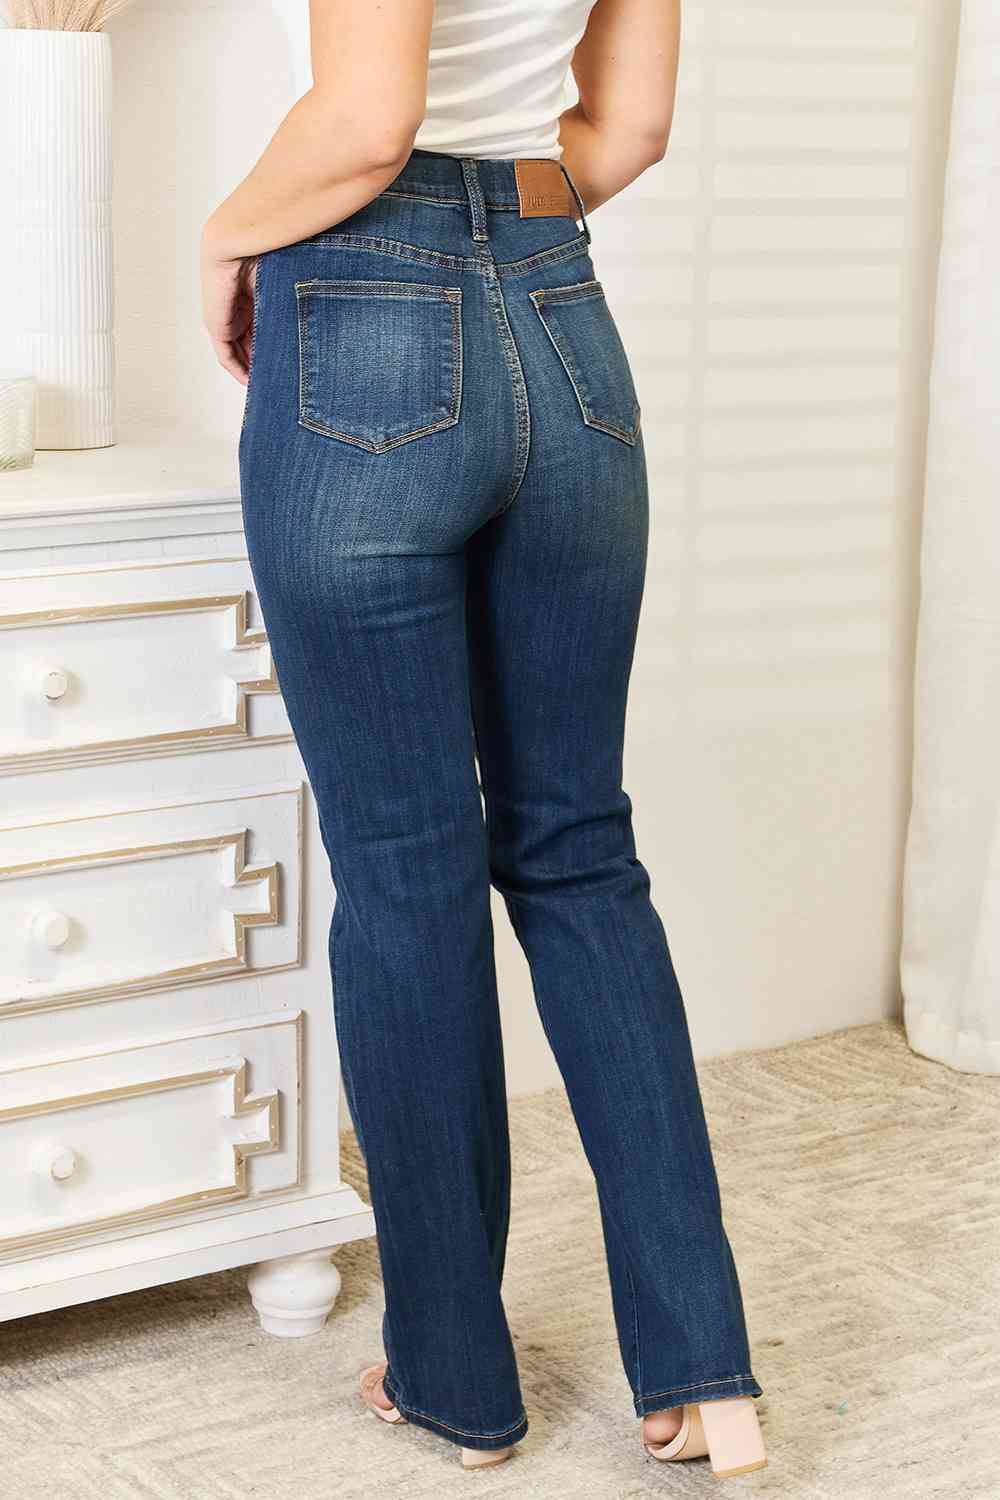 Back View, Judy Blue High Waist Vintage Pull On Slim Bootcut Jeans Style 88589